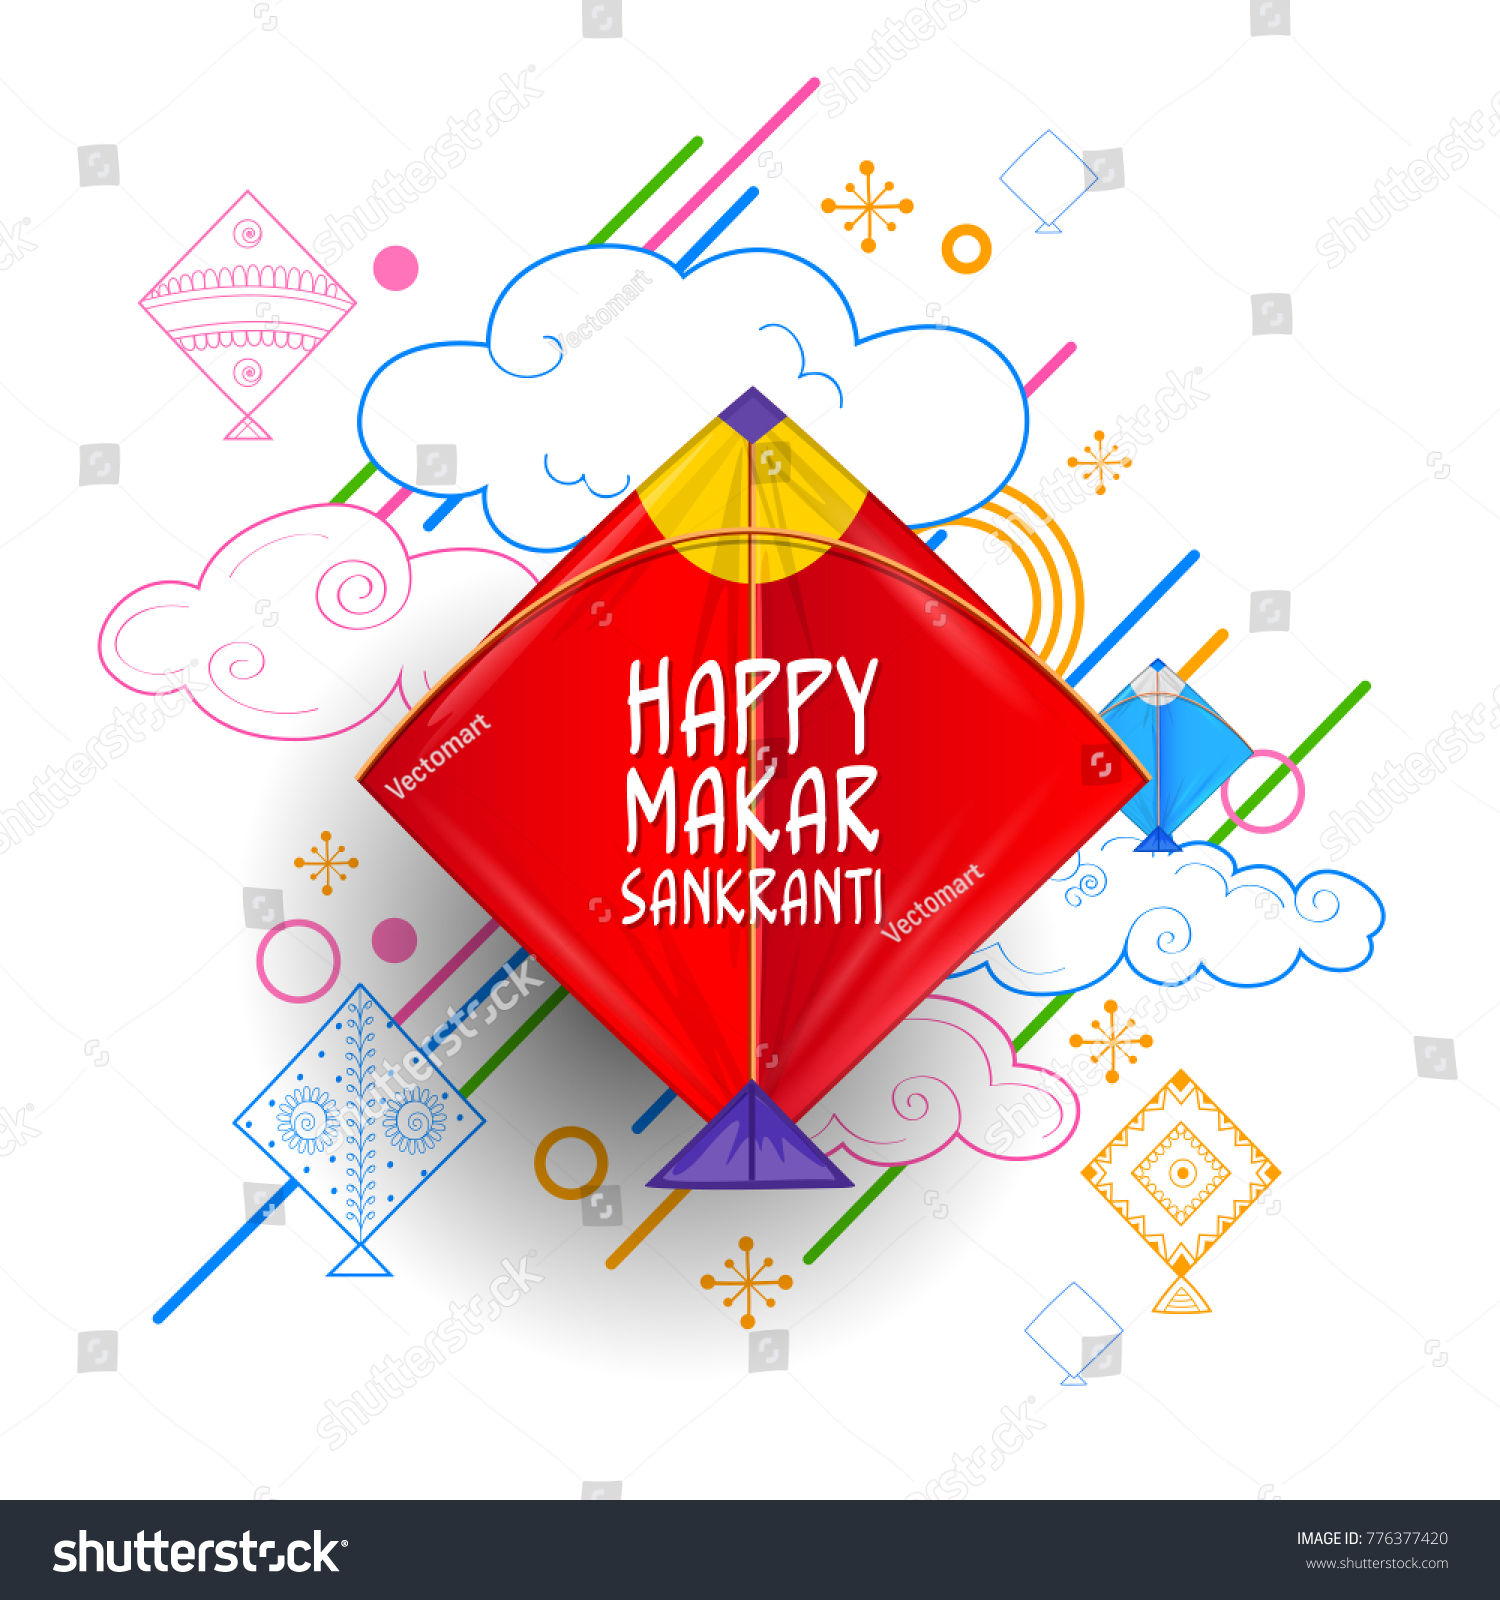 SVG of illustration of Happy Makar Sankranti wallpaper with colorful kite string for festival of India svg